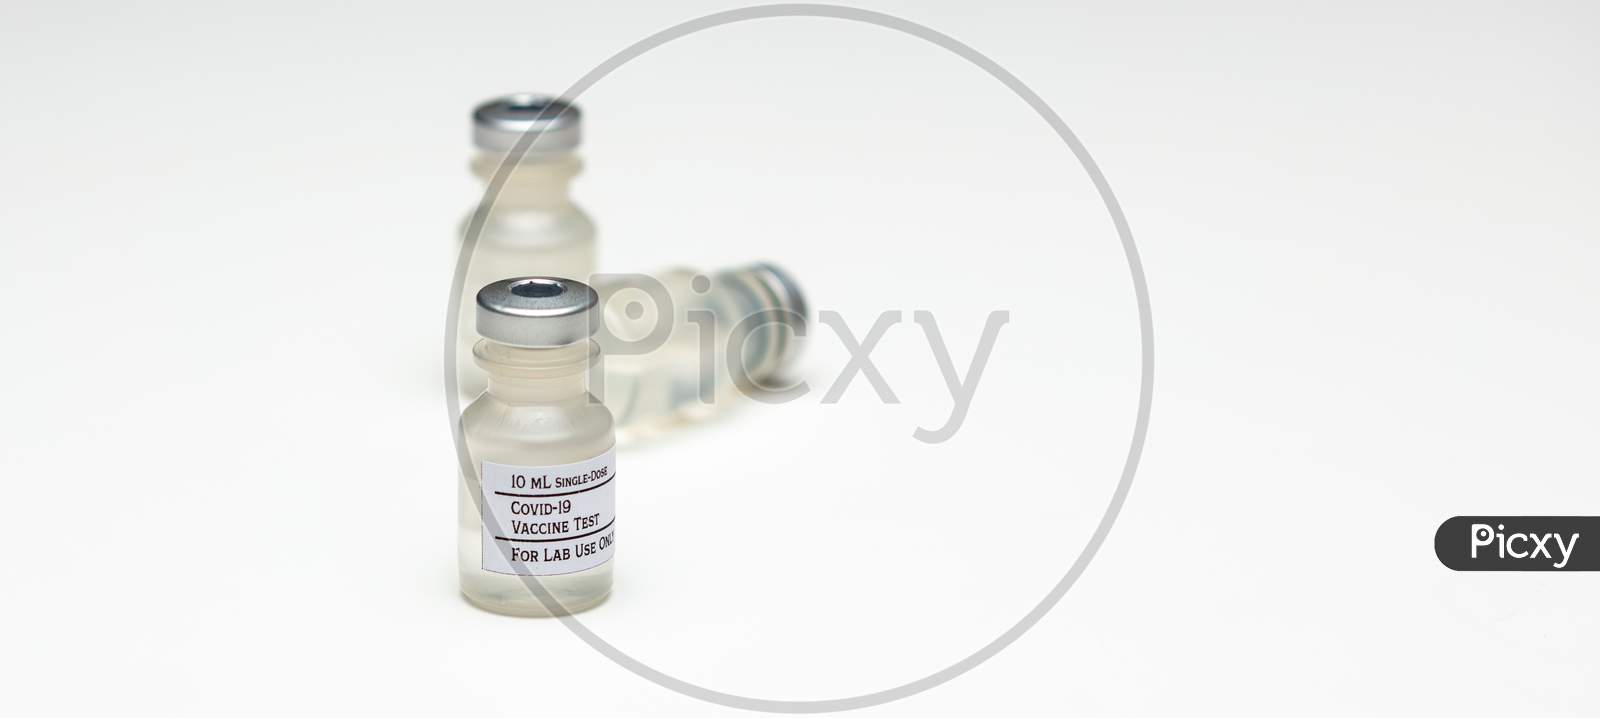 A Pair Of Covid-19 Test Vaccine Vials Isolated On A White Background.